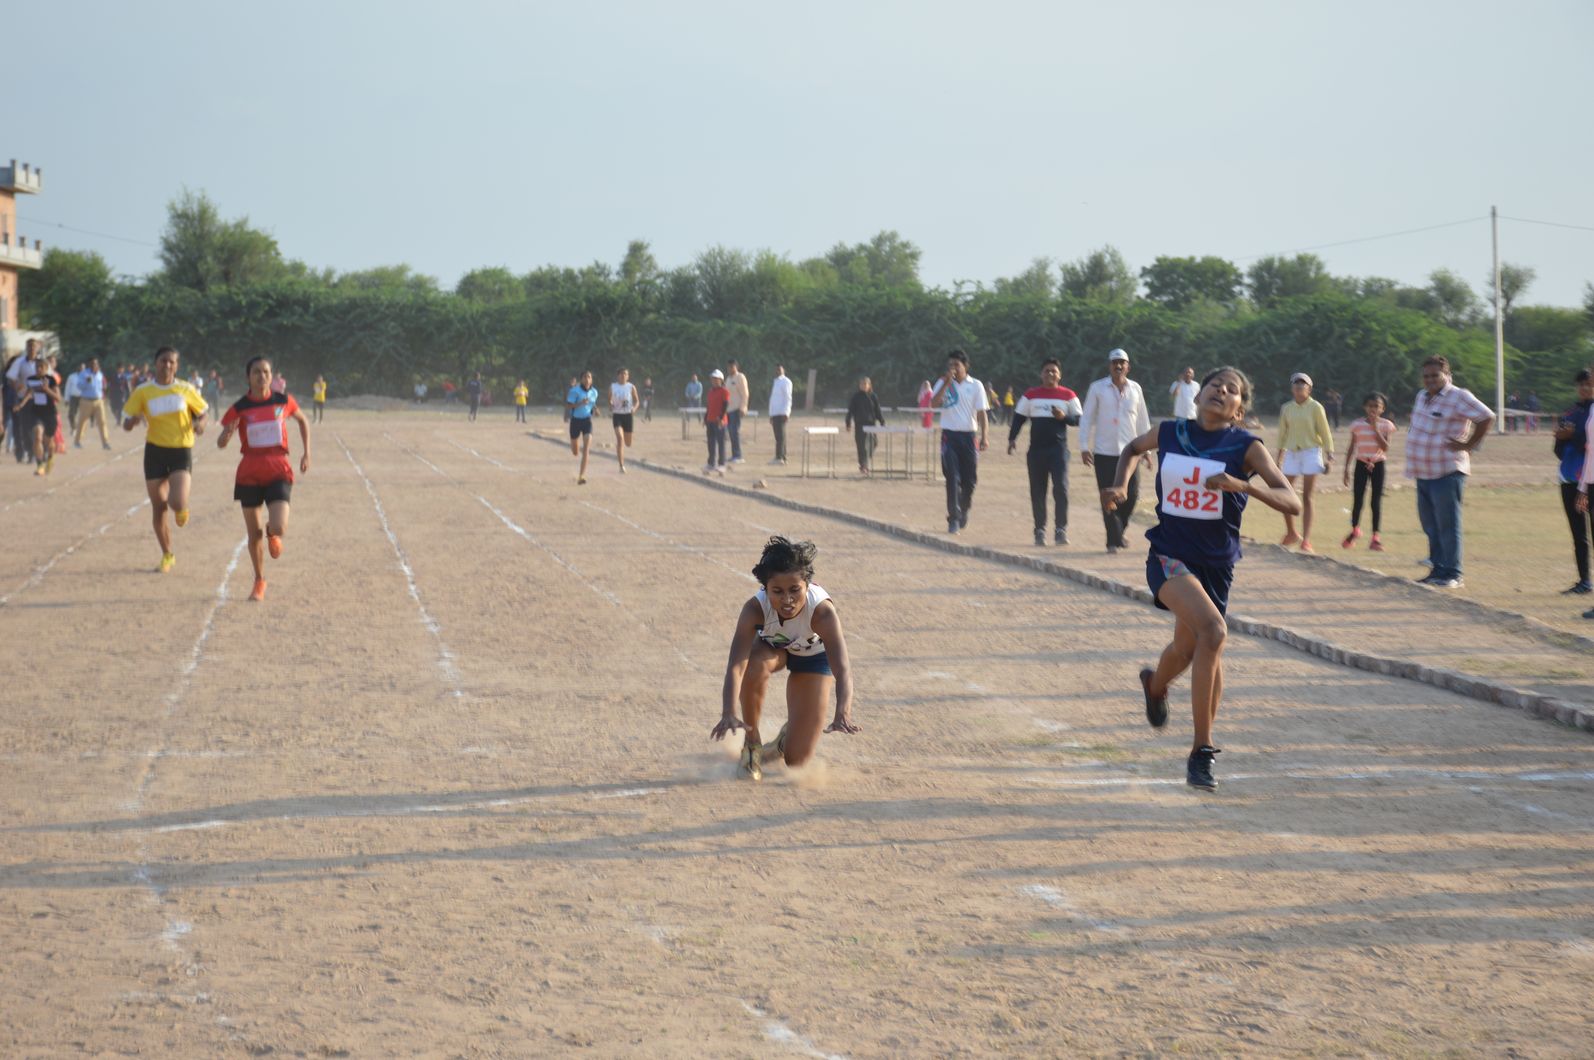 Not a trek, playing field, won gold by practicing in fields